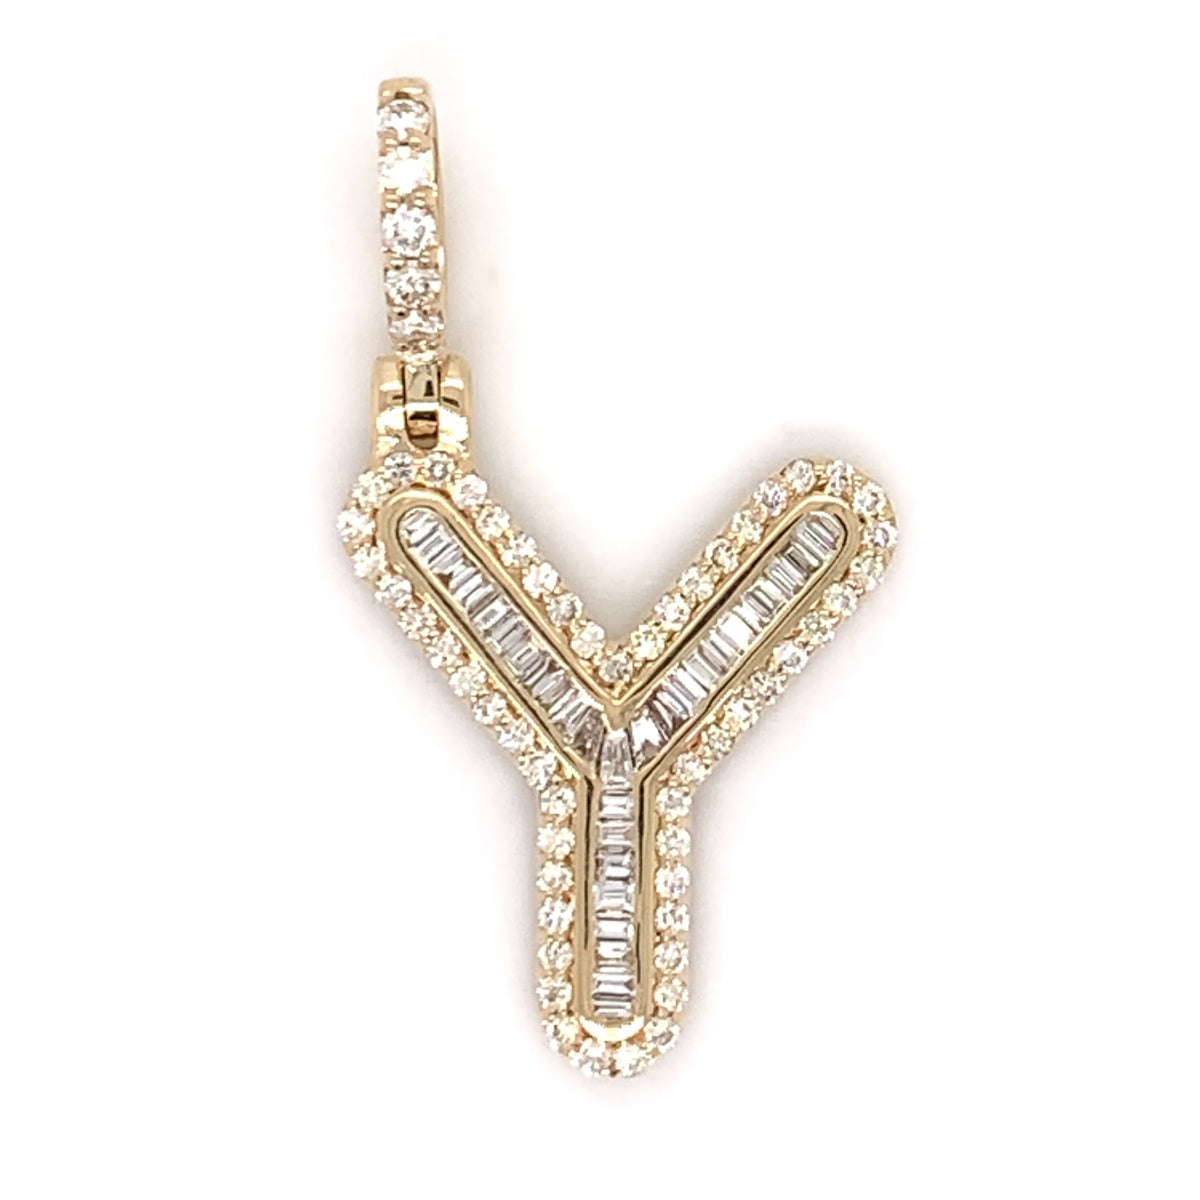 1.00 CT. Diamond Baguette Letter "Y" Pendant in 10K Gold - White Carat - USA & Canada